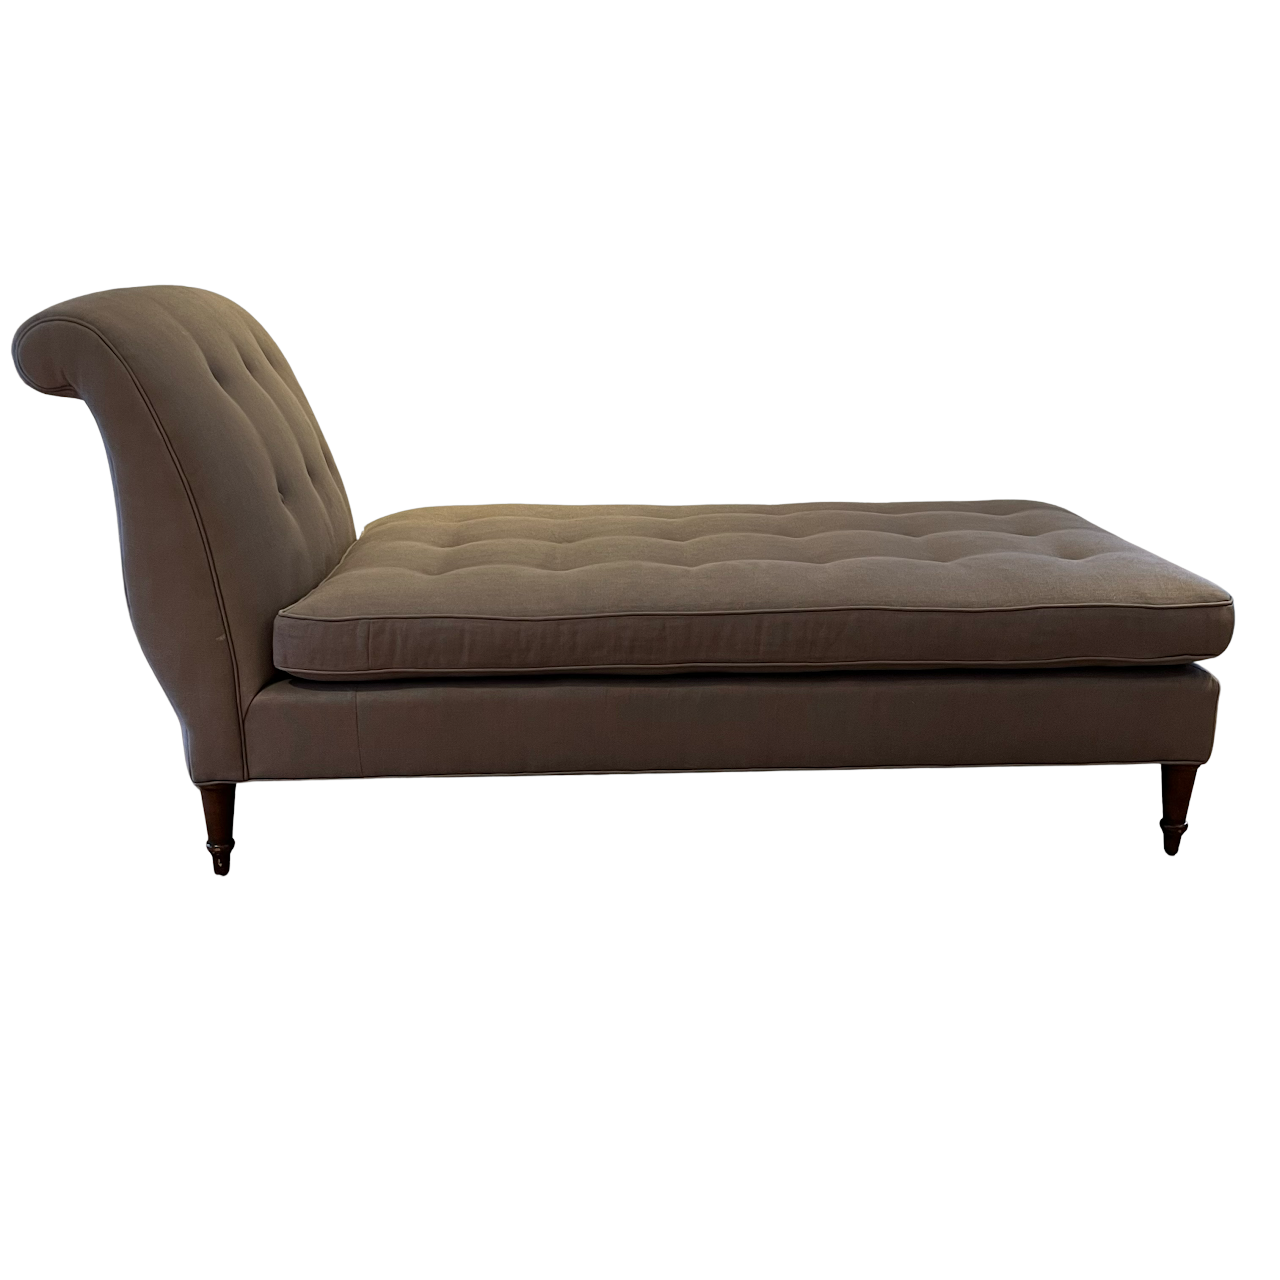 Jonathan-Wesley Upholstery Button-Tufted Chaise Lounge